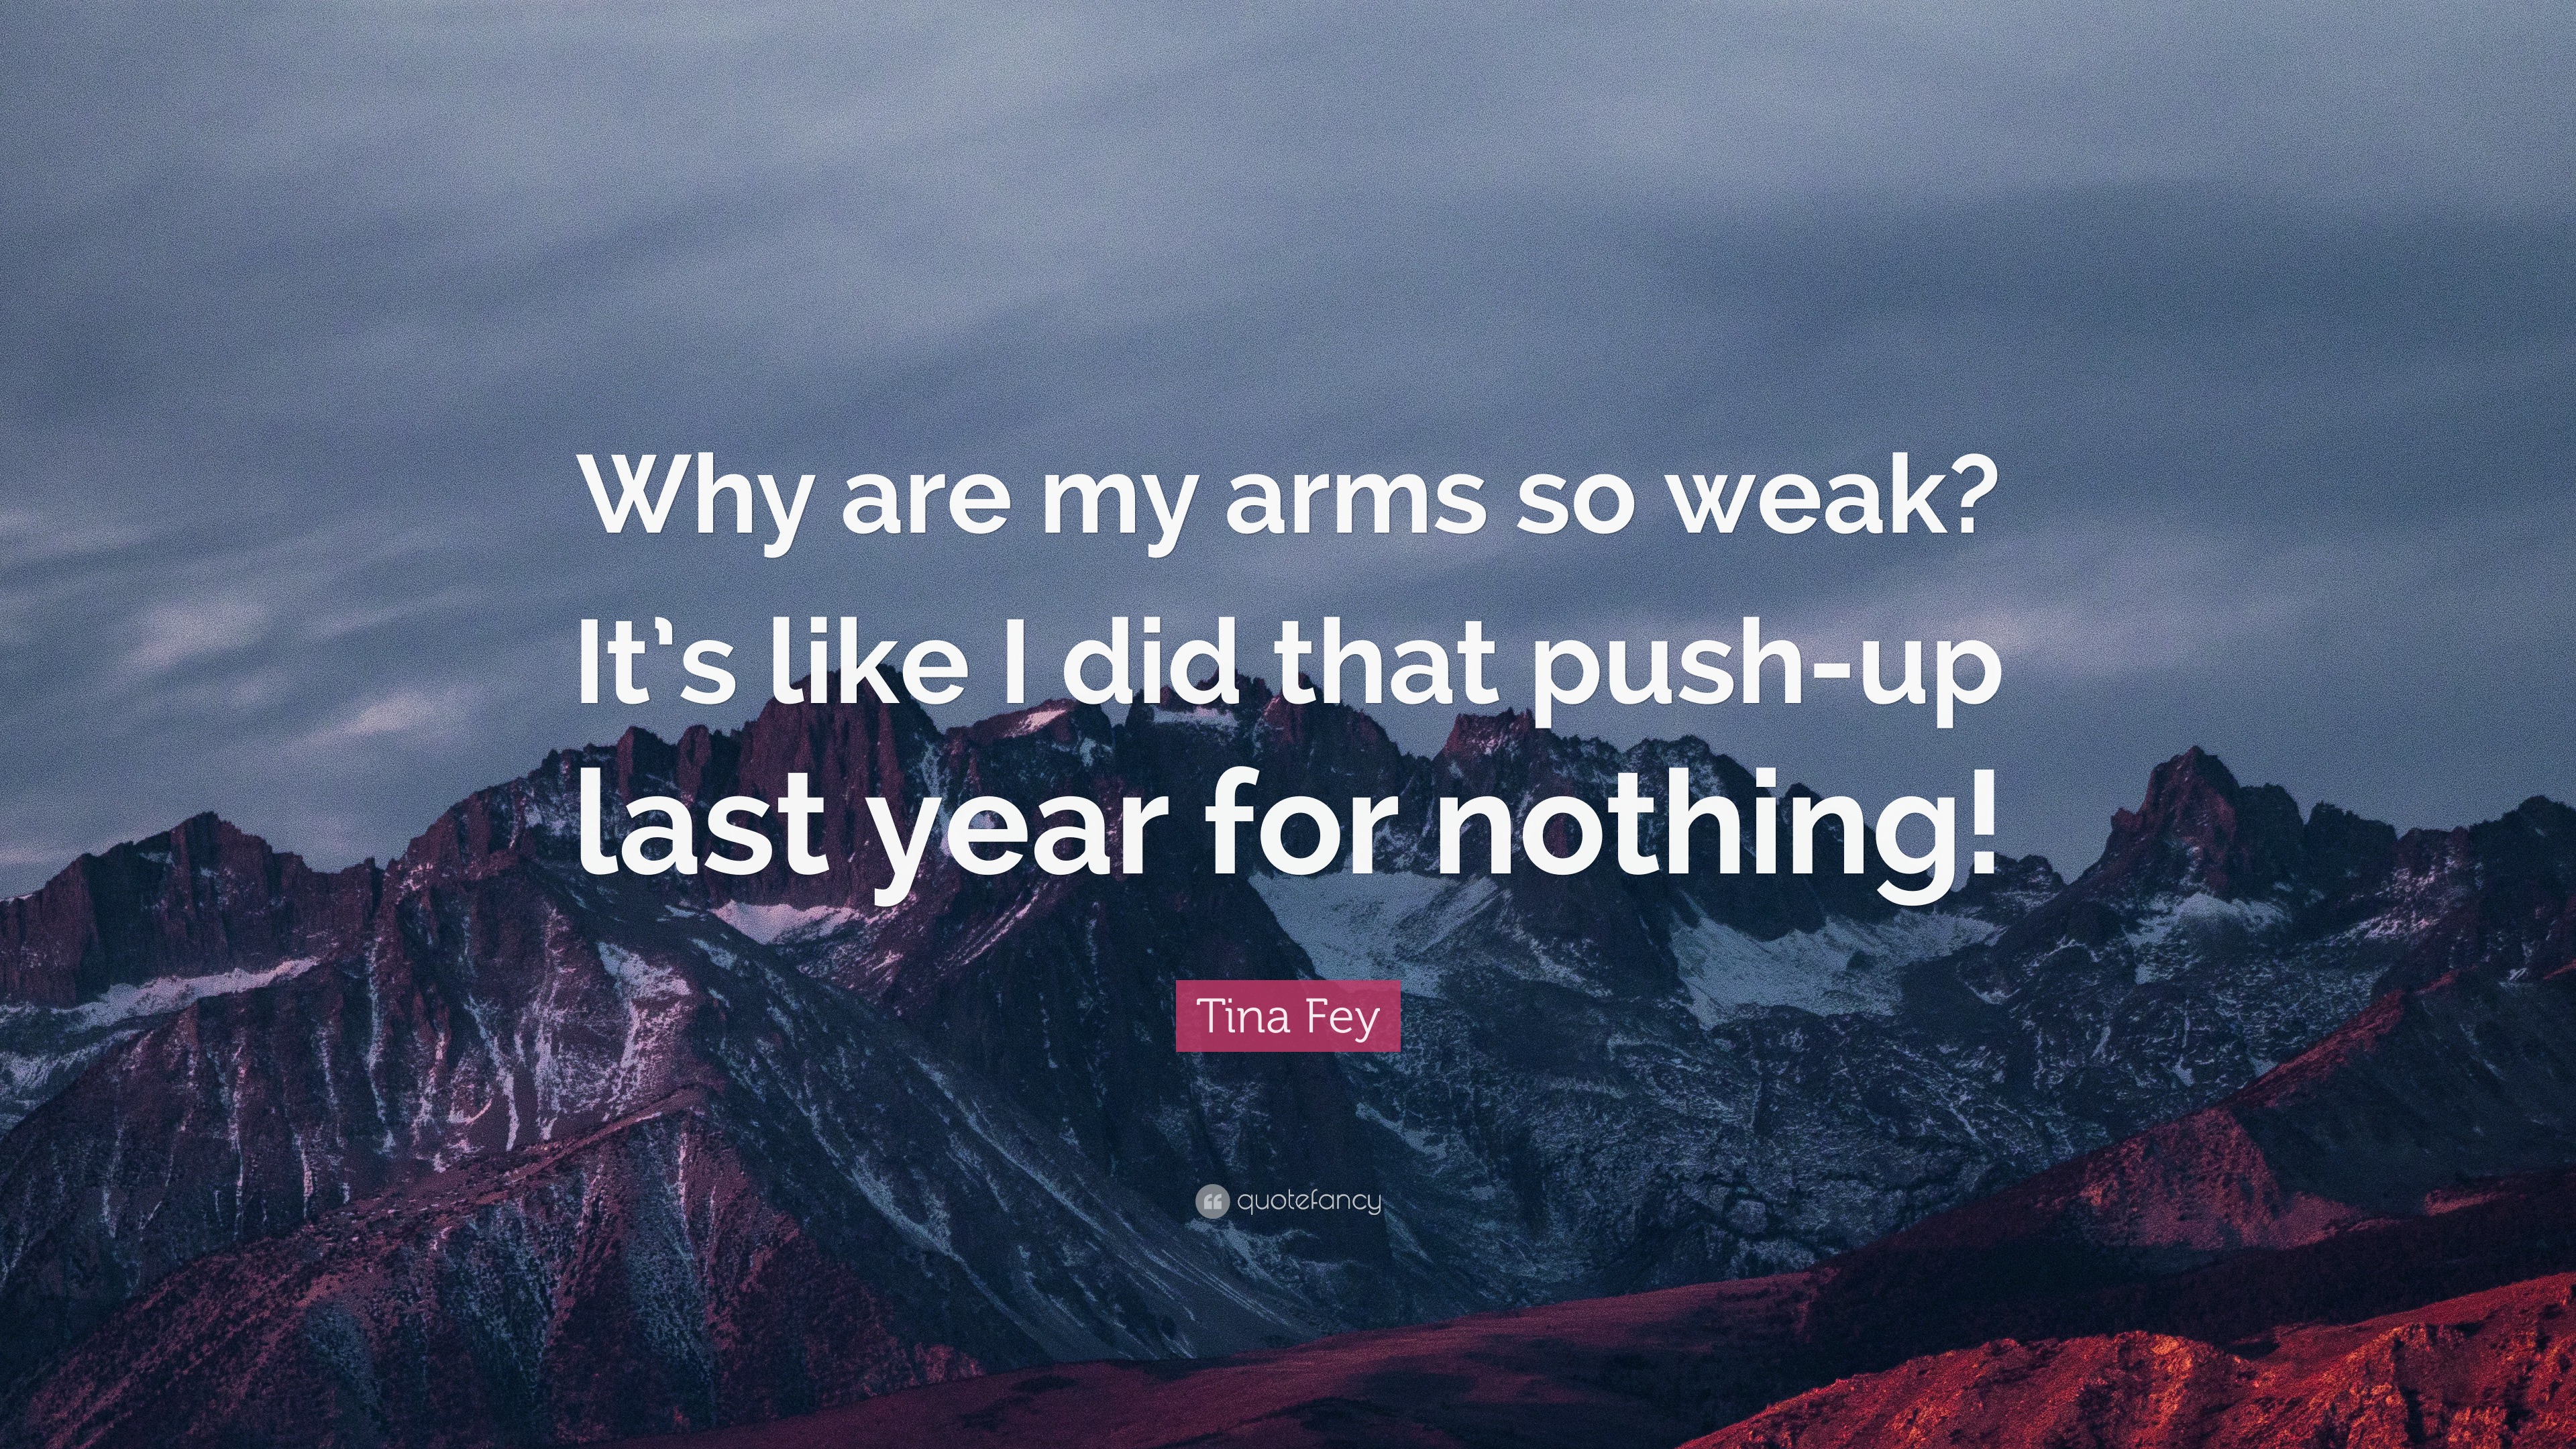 Tina Fey Quote: “Why are my arms so weak? It’s like I did that push-up